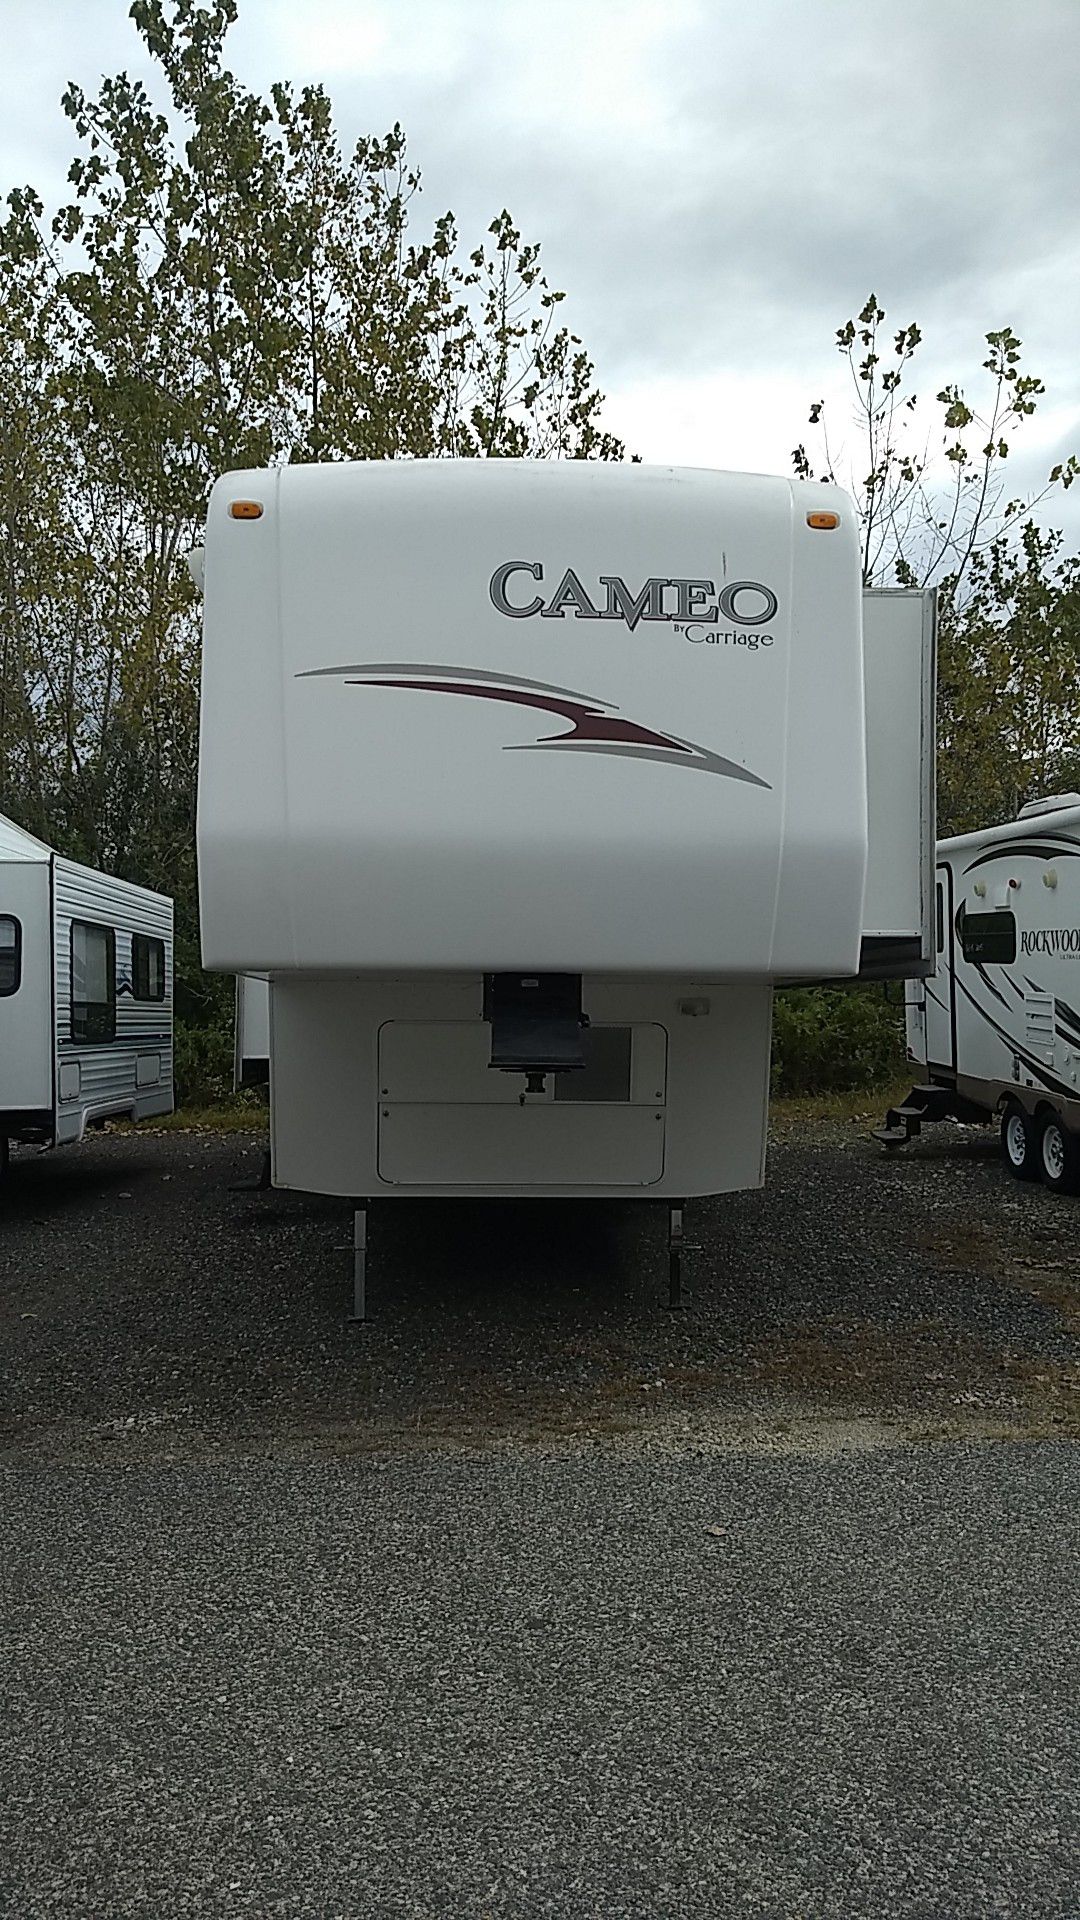 2009 Cameo by Carriage Fifth Wheel